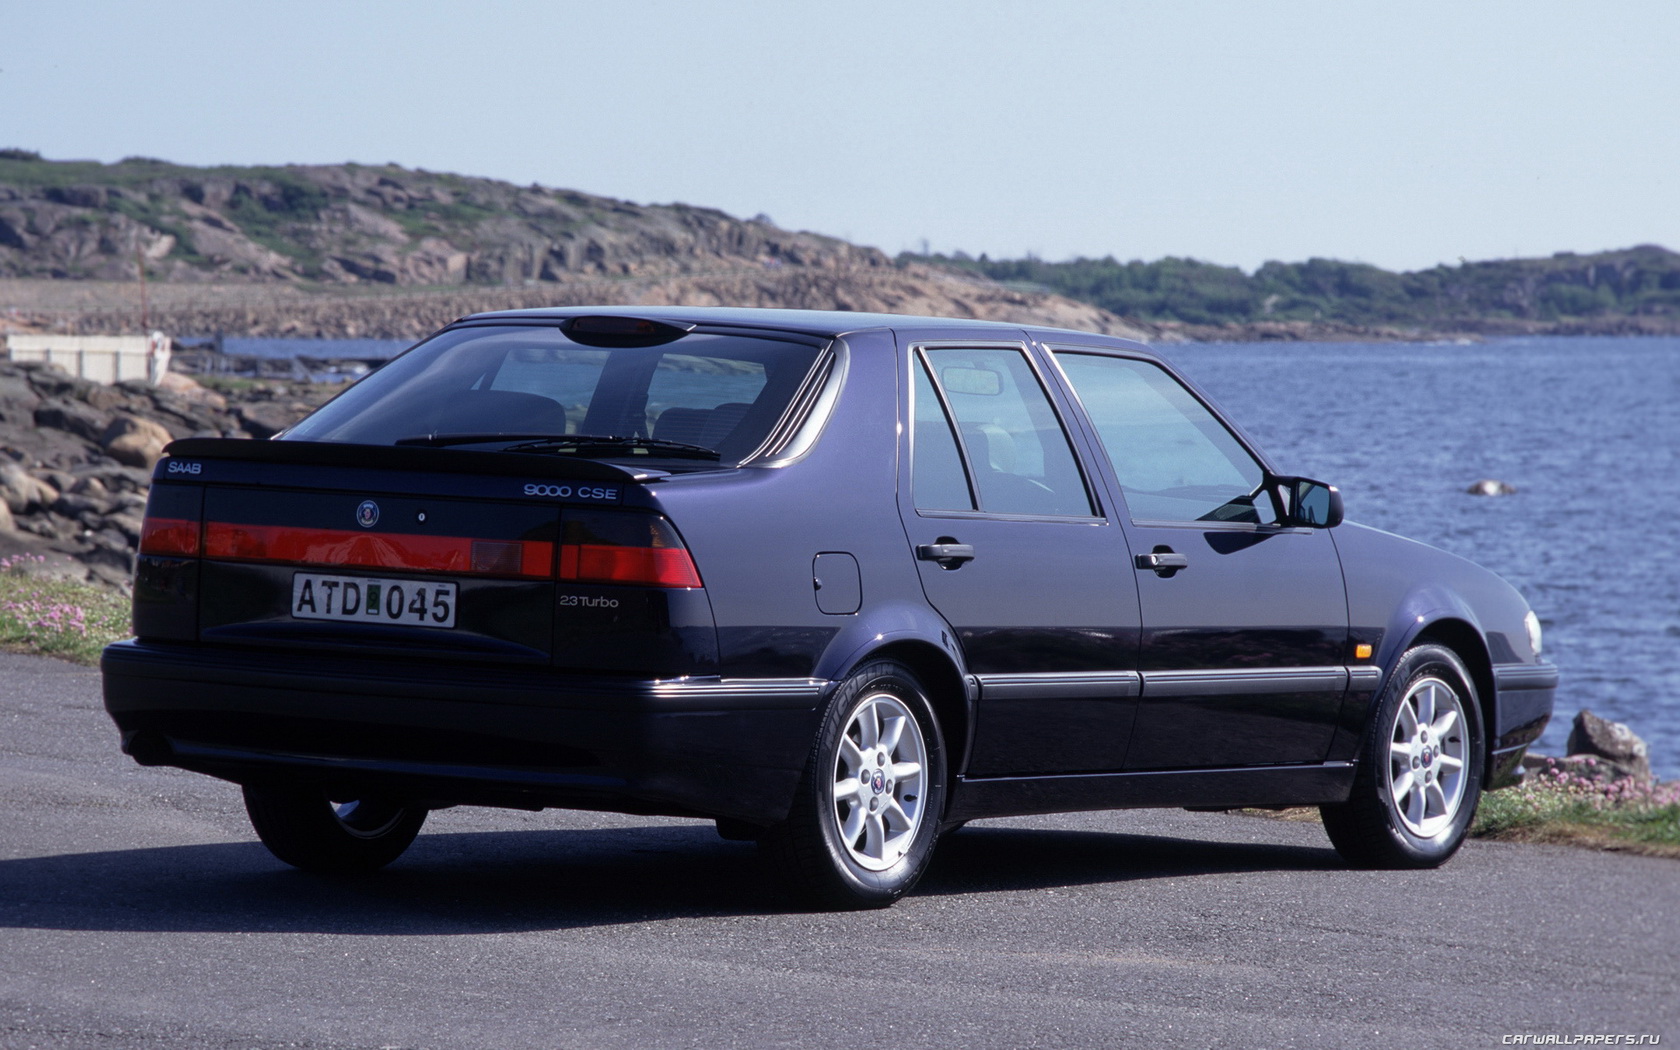 saab edition related images,151 to 200 - Zuoda Images